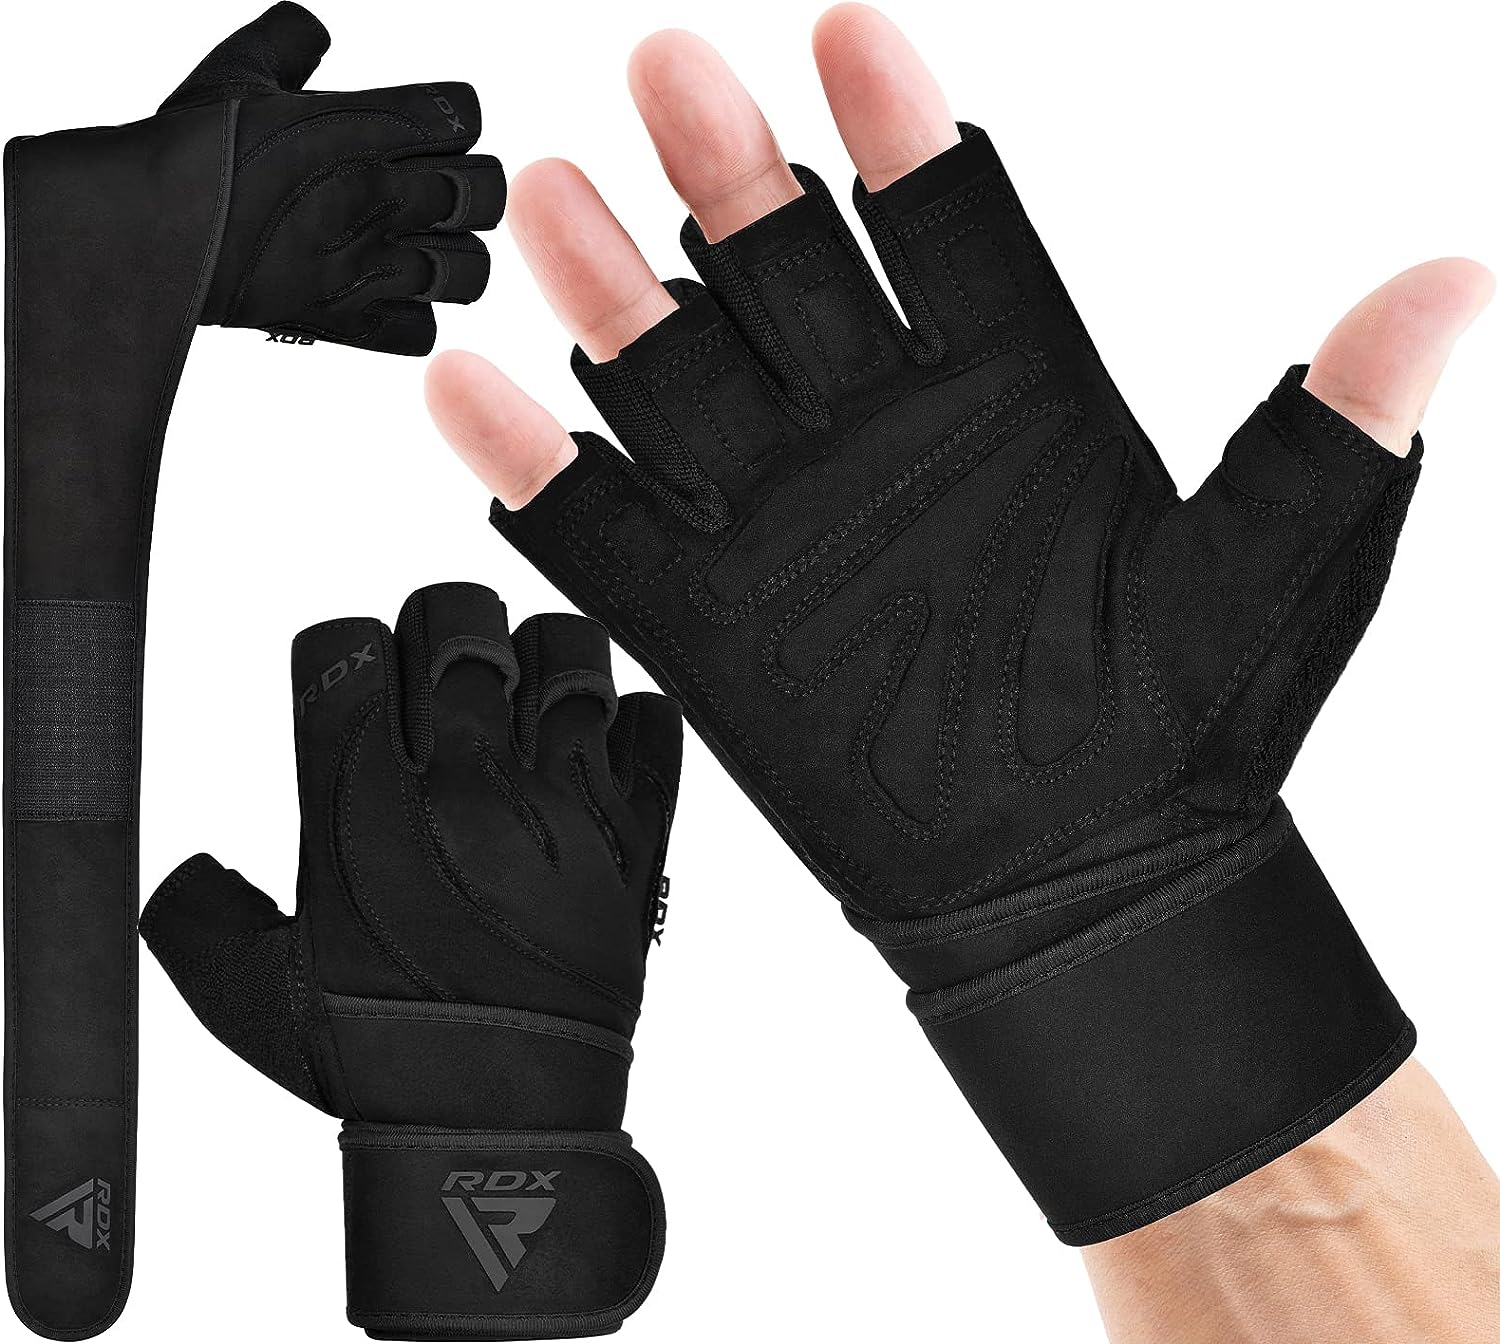 RDX Weight Lifting Gloves with Wrist Support, 50 CM Long Wrist Straps, Anti Slip Padded Palm Protection, Breathable Gym Grip for Fitness Training Workout Powerlifting, Men Women Bodybuilding Exercise